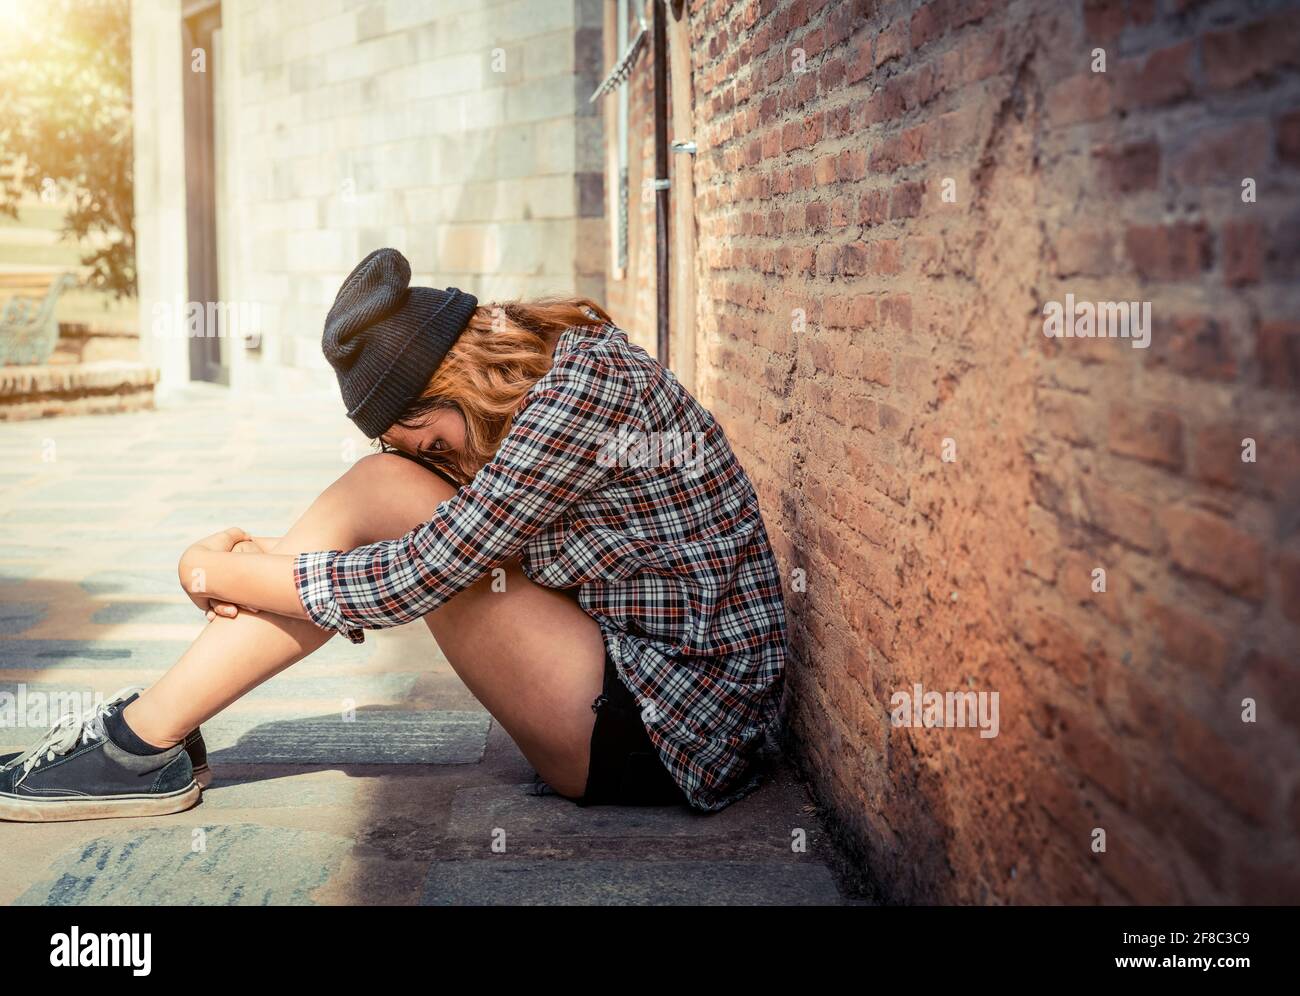 Depressed teenage woman feeling sad alone against brick wall in old town. Education and family failure concept. Stock Photo